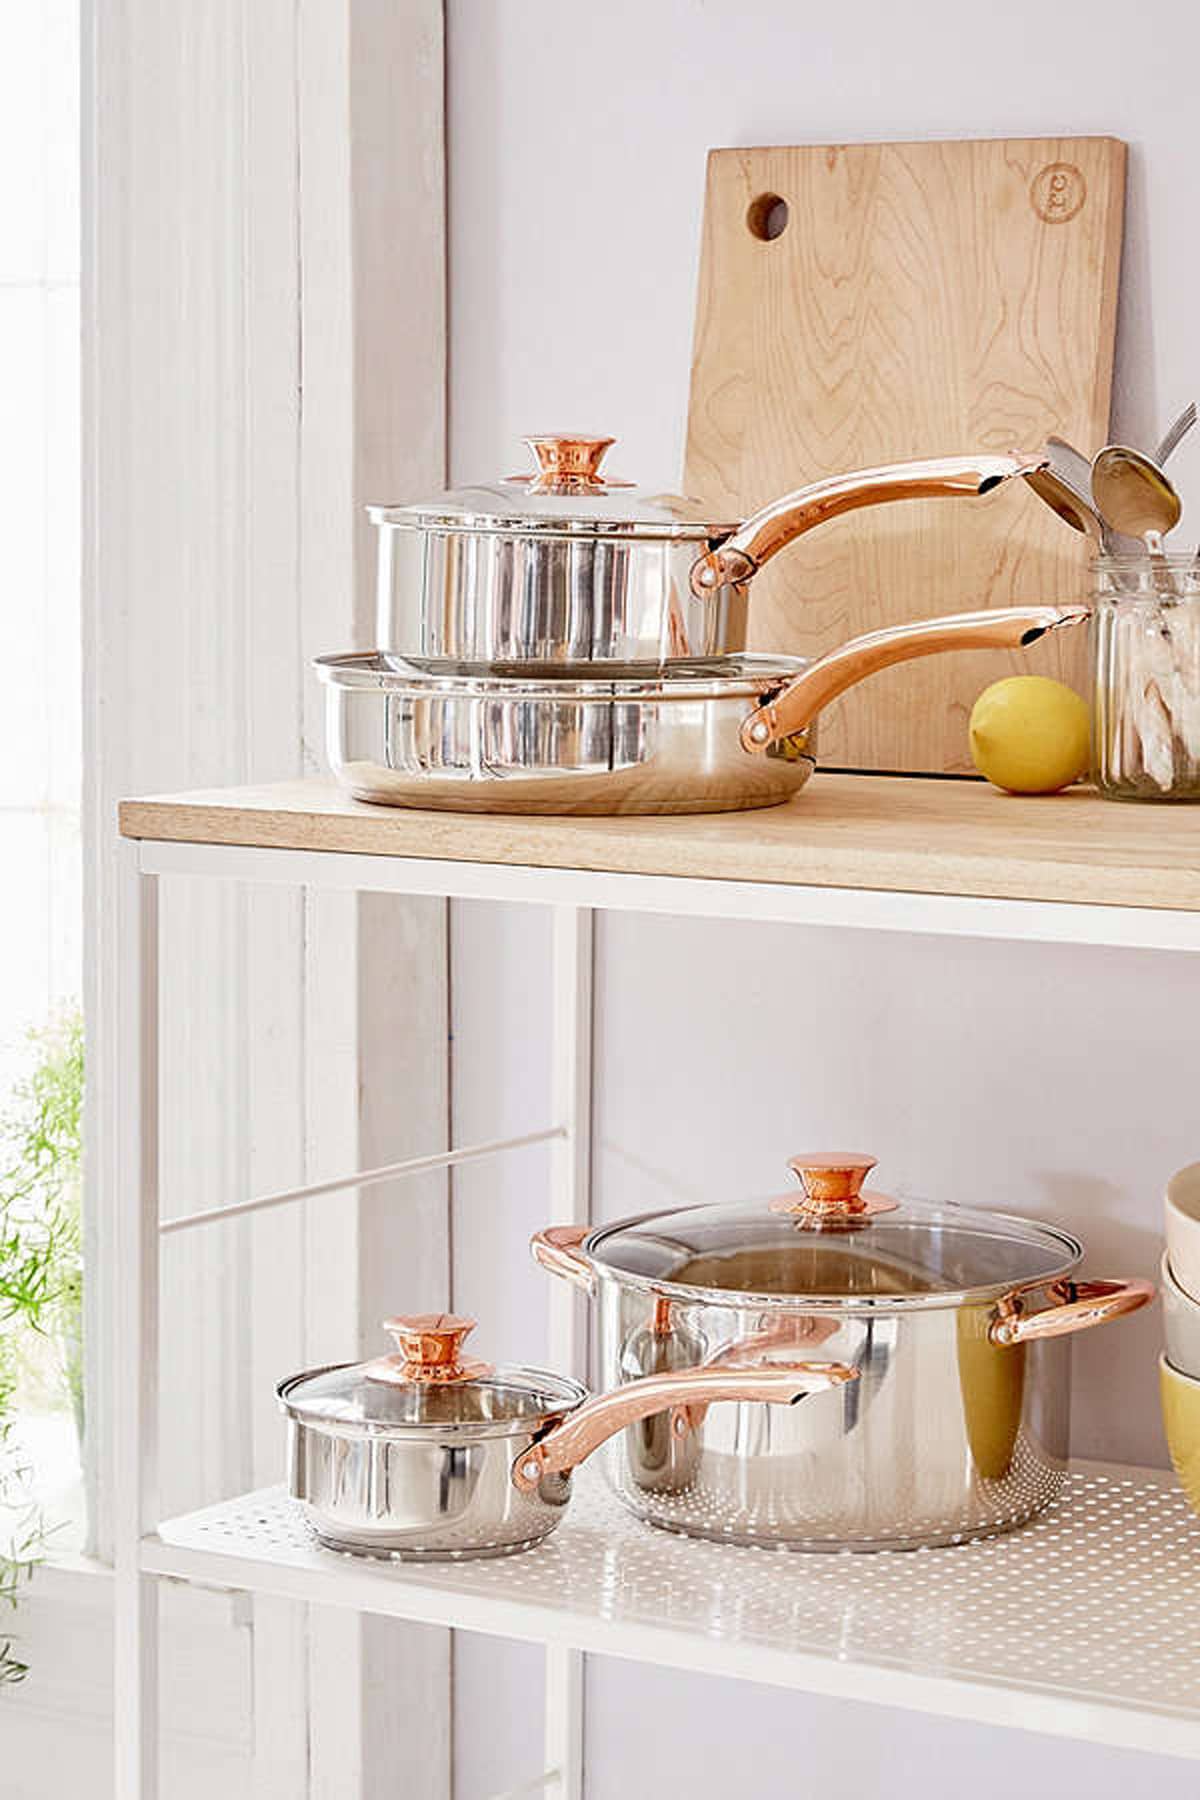 Urban Outfitters Sale on Cute and Affordable Kitchen Gifts